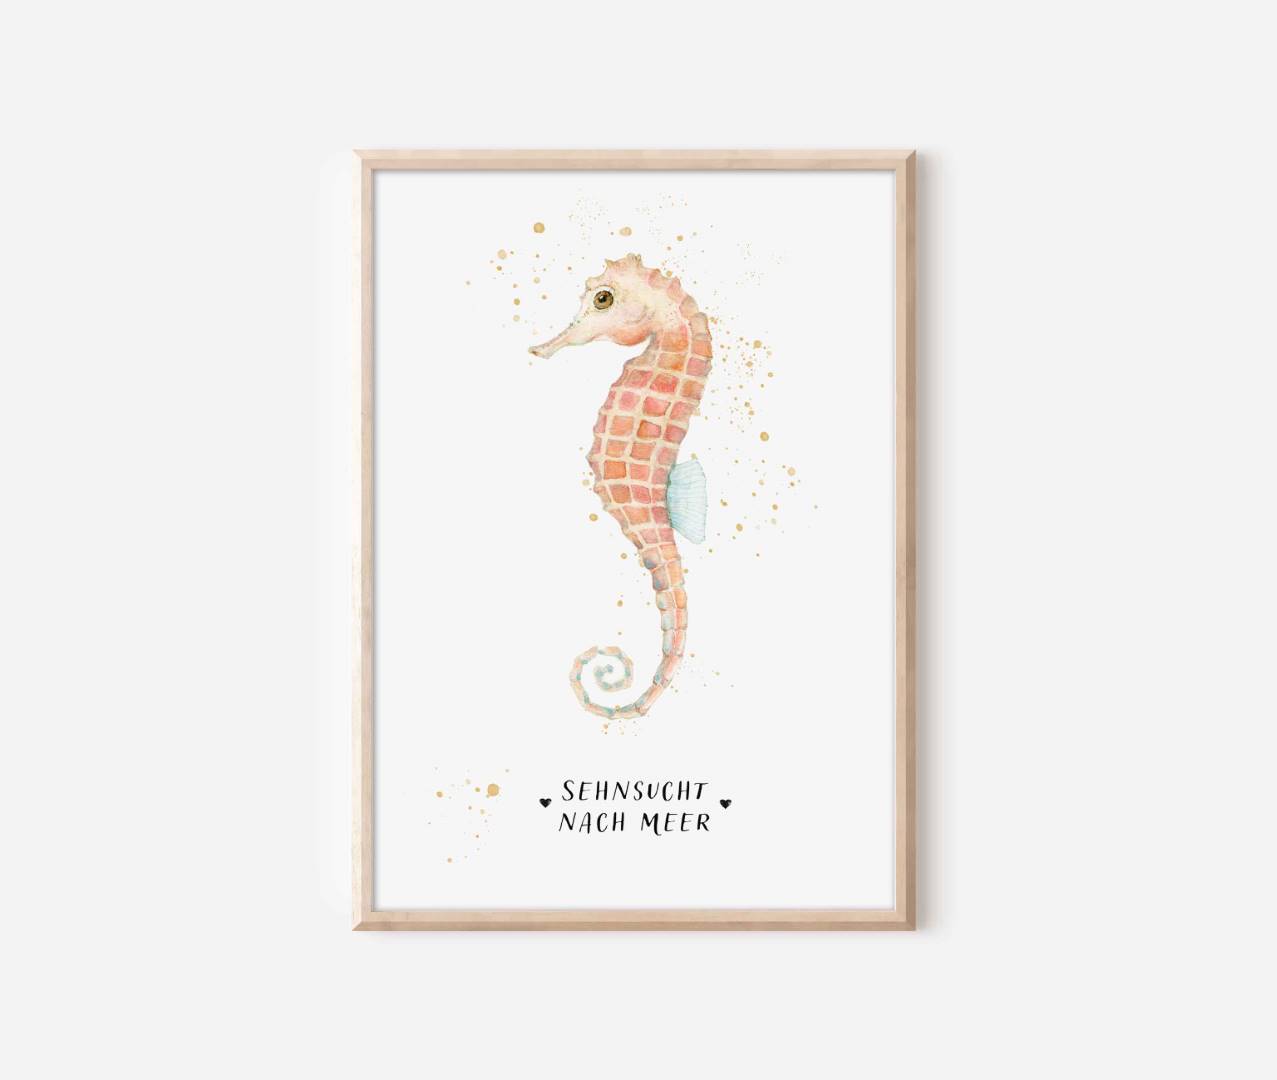 a watercolor painting of a sea horse